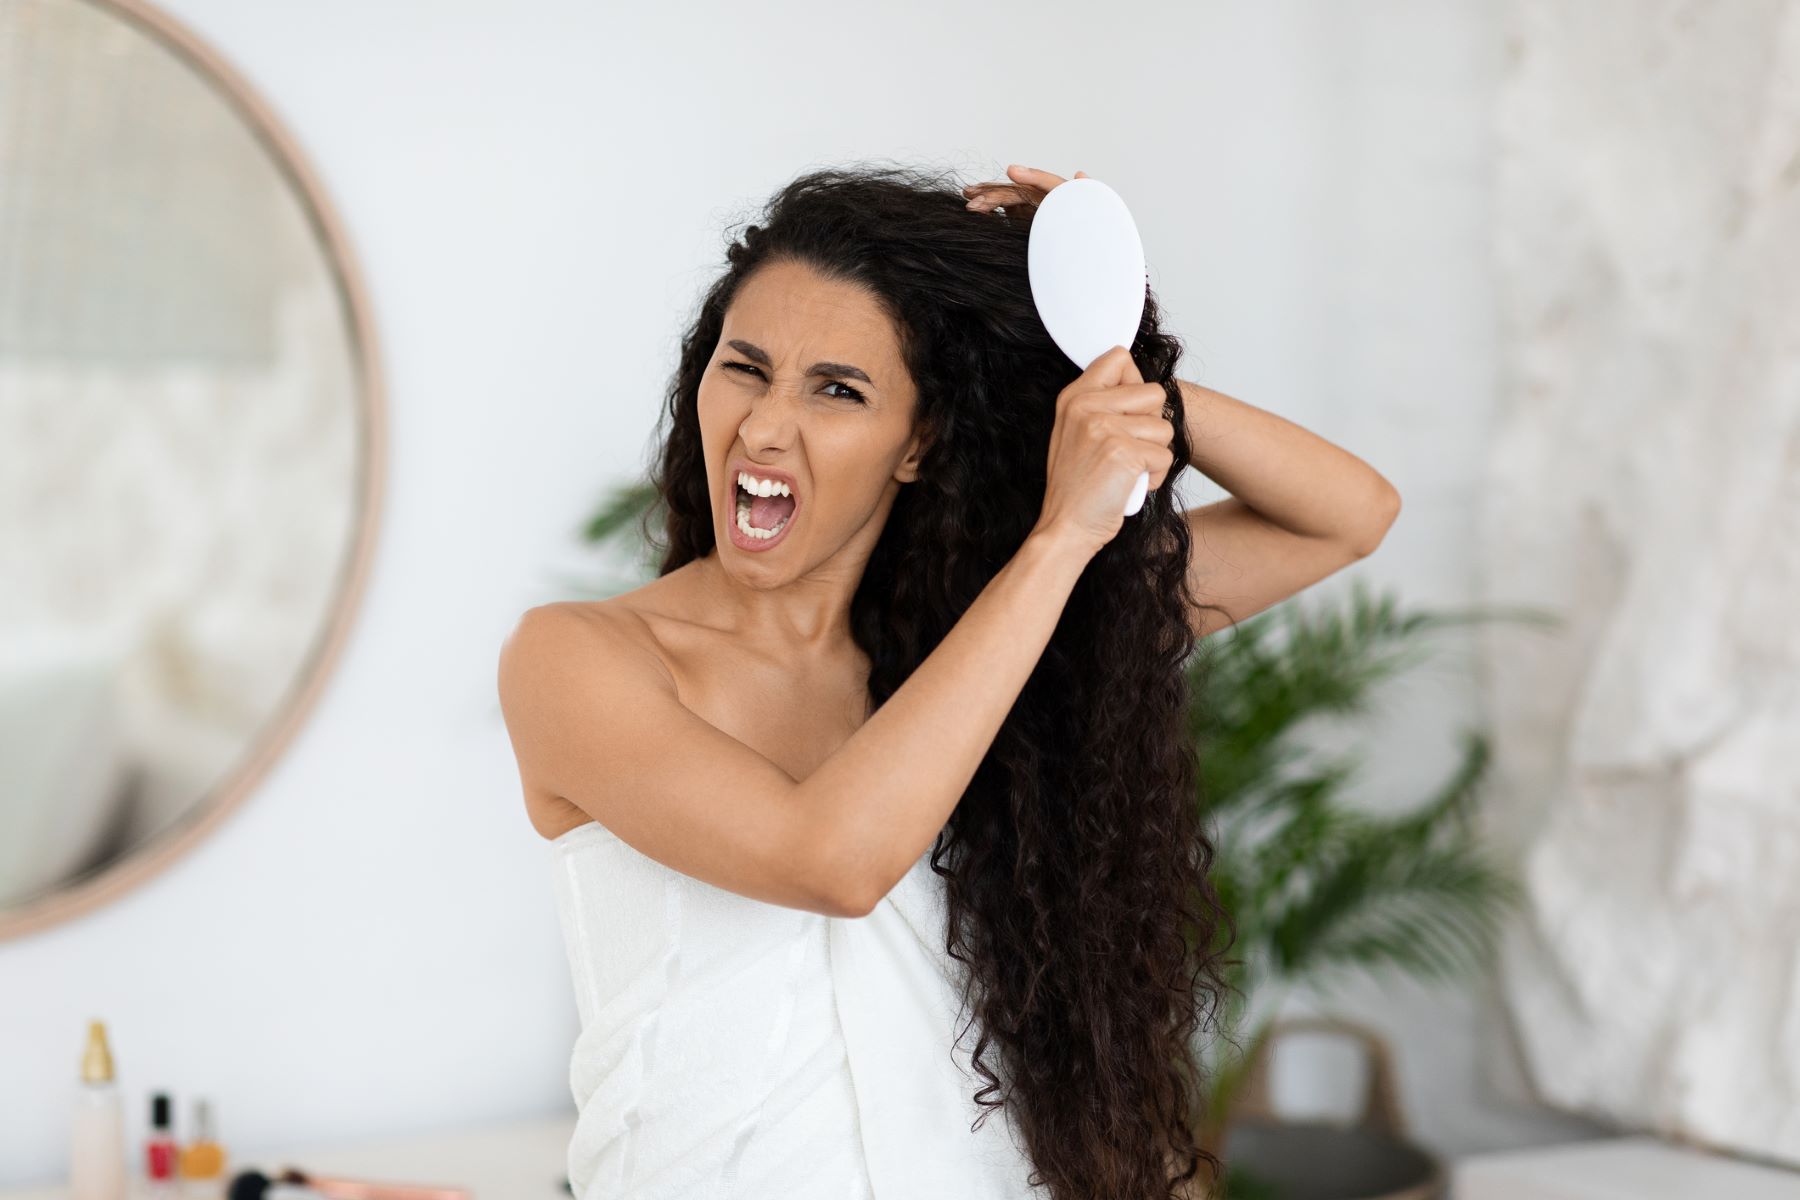 Woman being rough on her hair strands while brushing